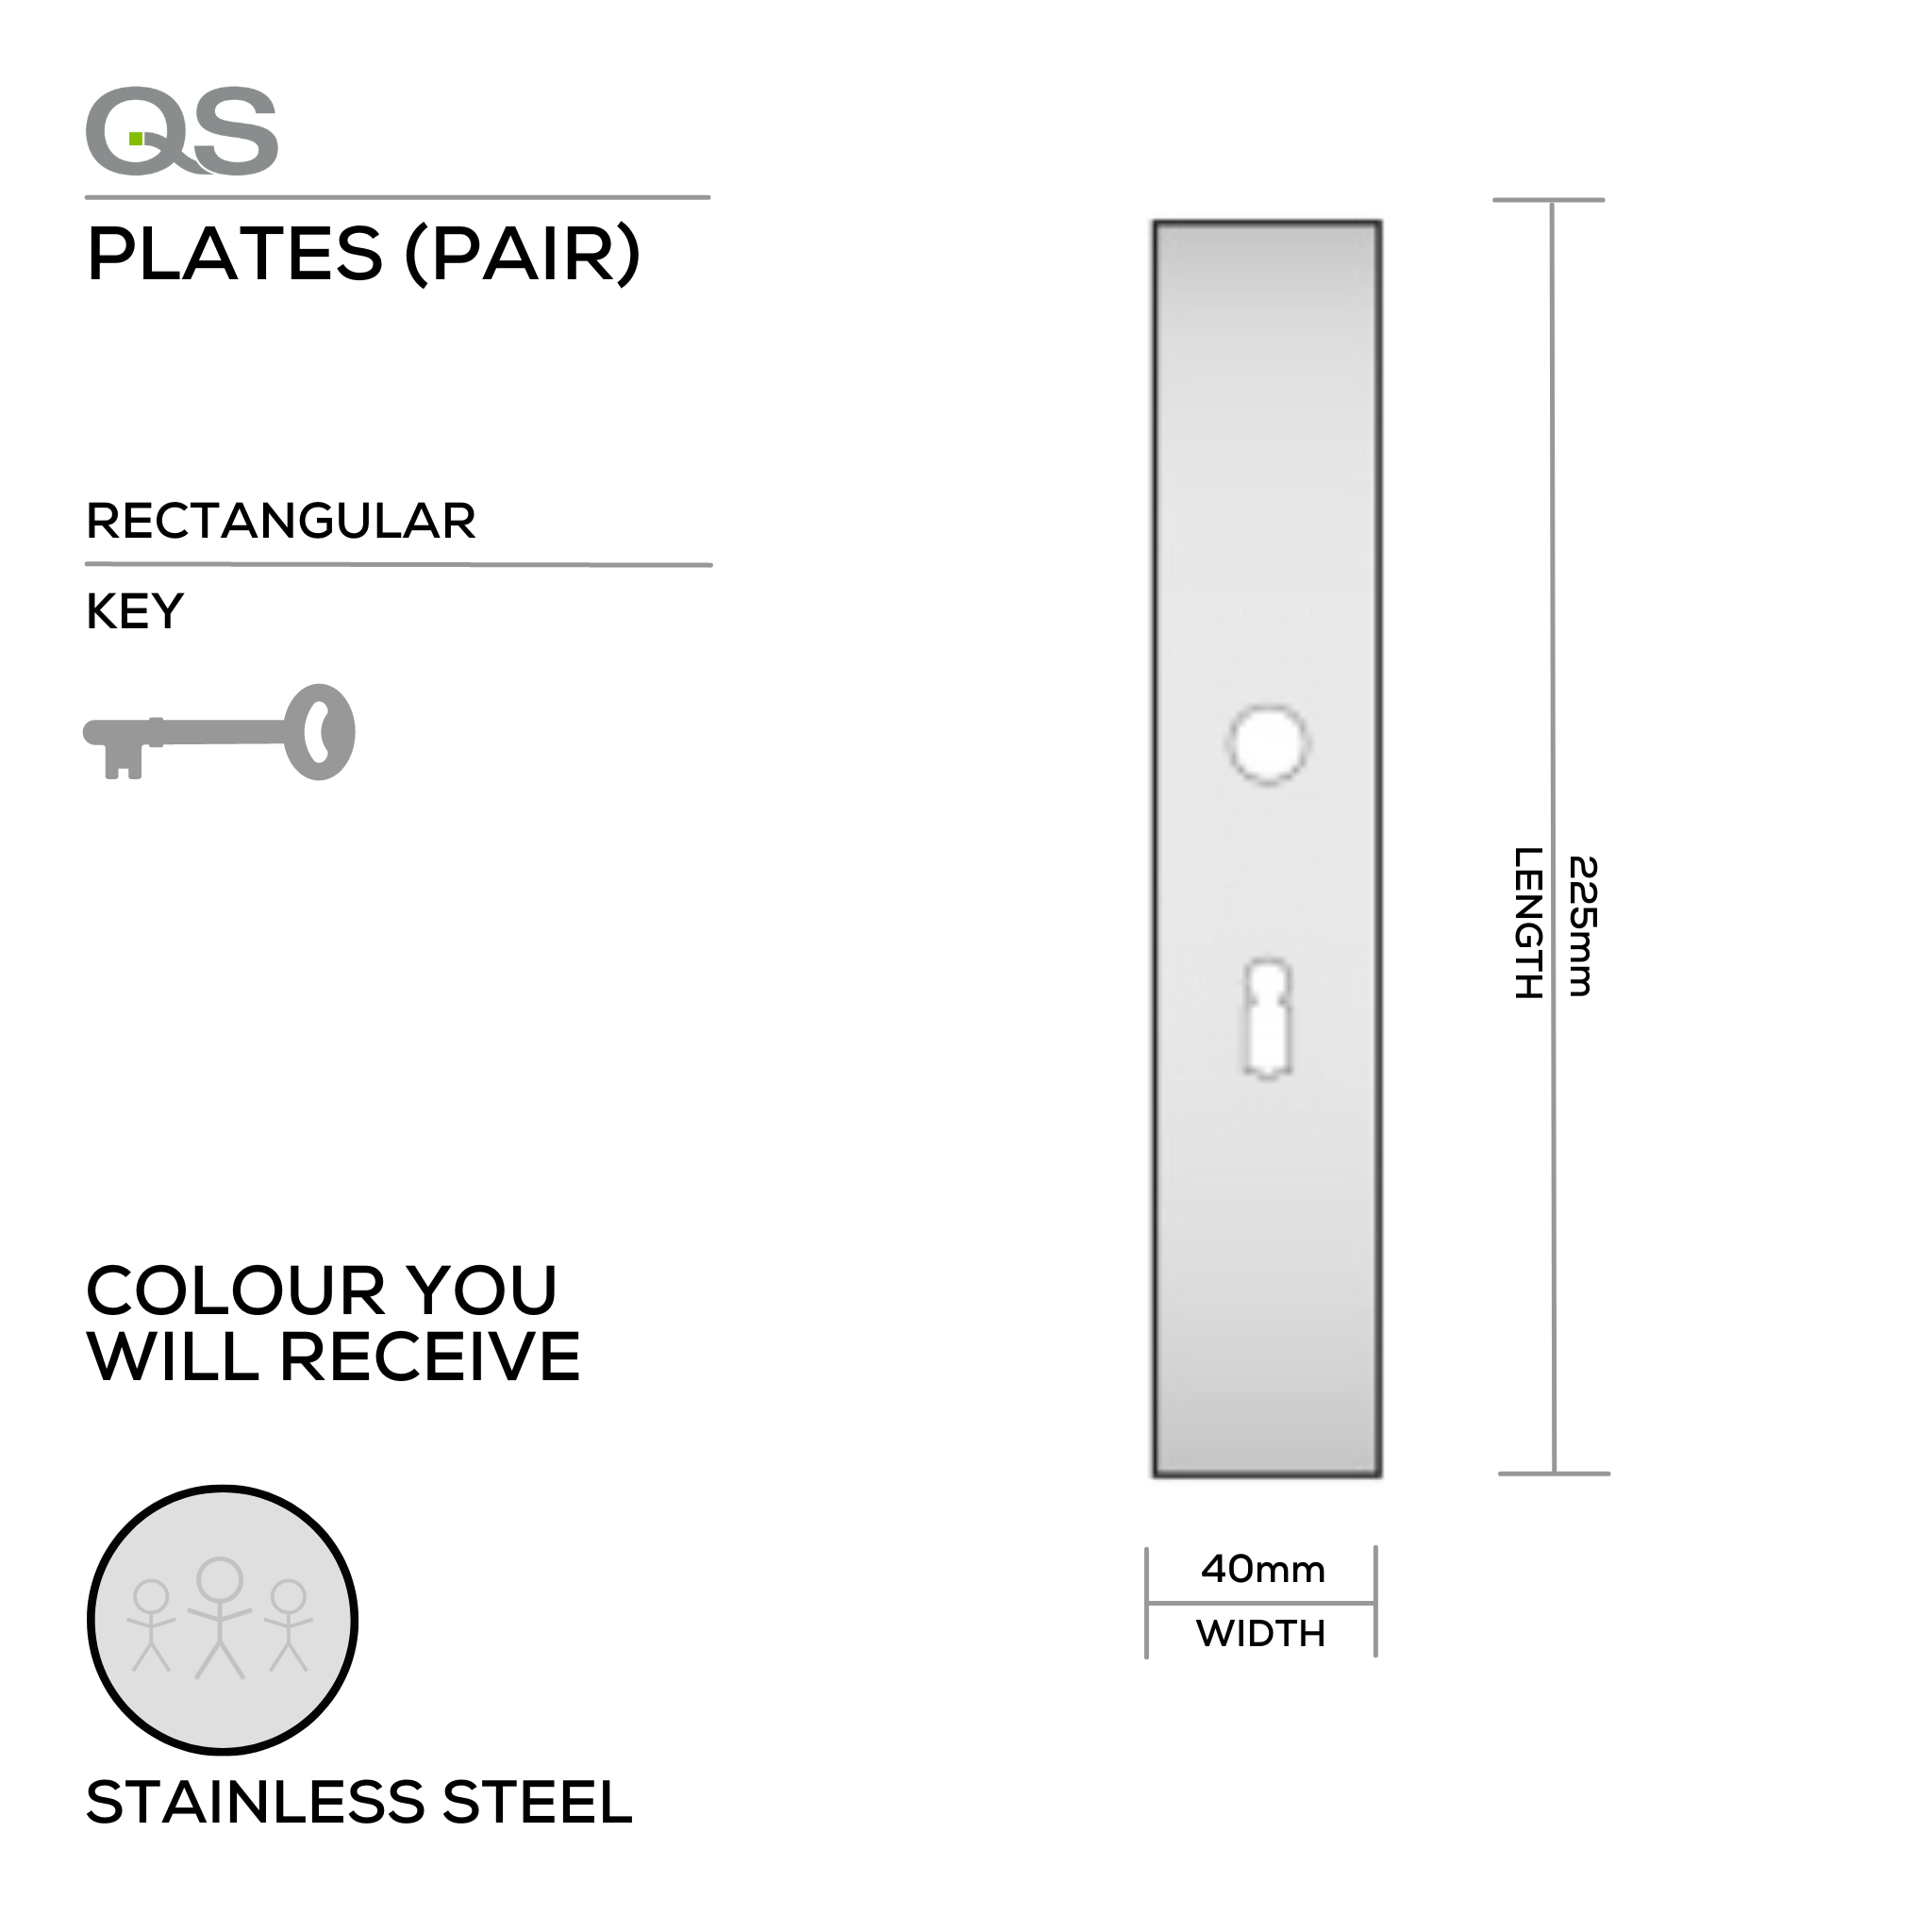 QS4429 KH, Plate, Rectangular, 225mm (l) x 40mm (w), Supplied with QS Handle, Stainless Steel, QS